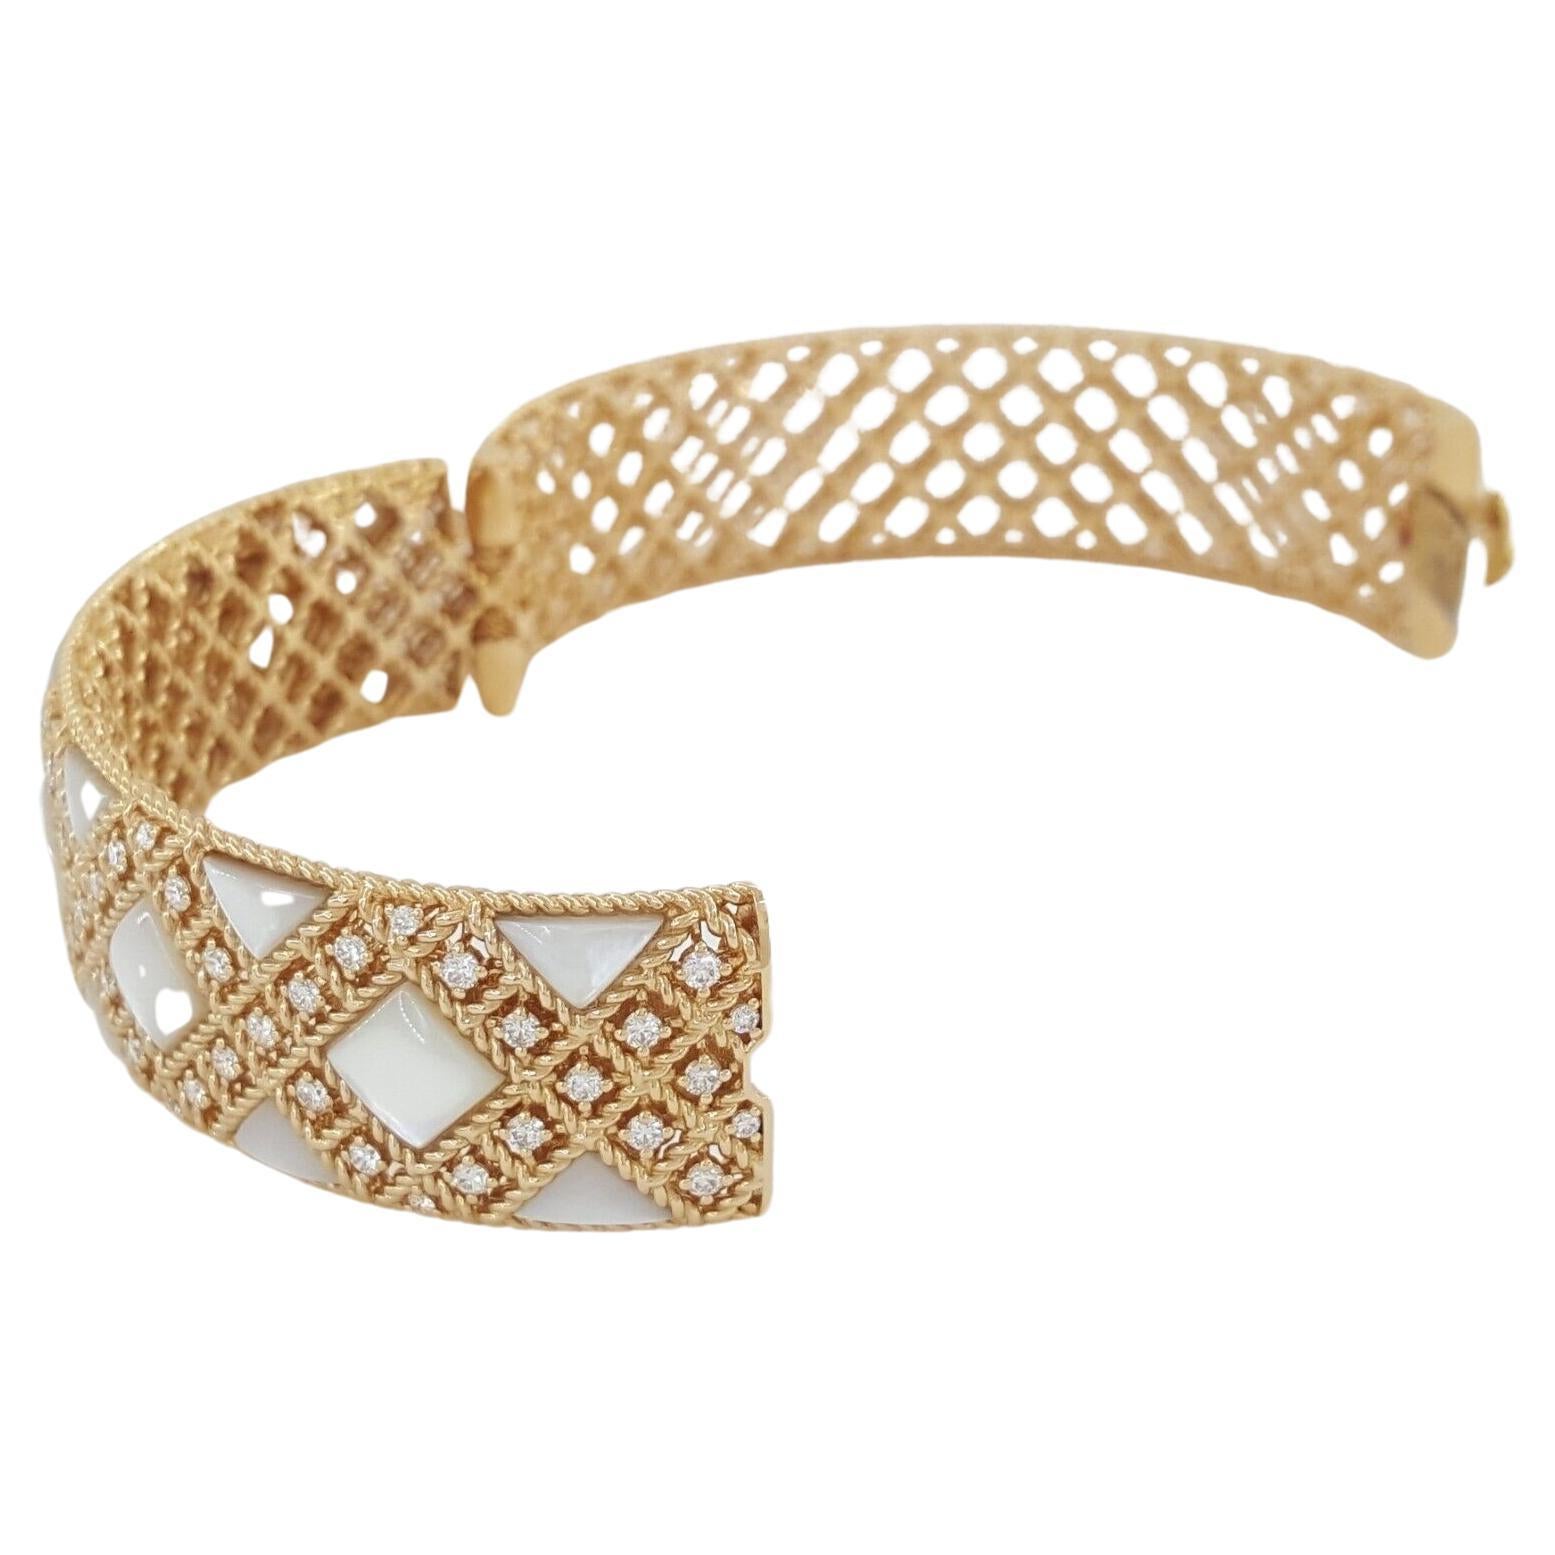 Roberto Coin Palazzo Ducale MoP 1.24 ct Diamond 18K Rose Gold Bangle Bracelet. 

The bracelet weighs 43.9 grams, 6.25 inches (small size, fits a small to medium wrist), contains 67 Natural Round Brilliant Cut Diamonds weighing approximately 1.24 ct,